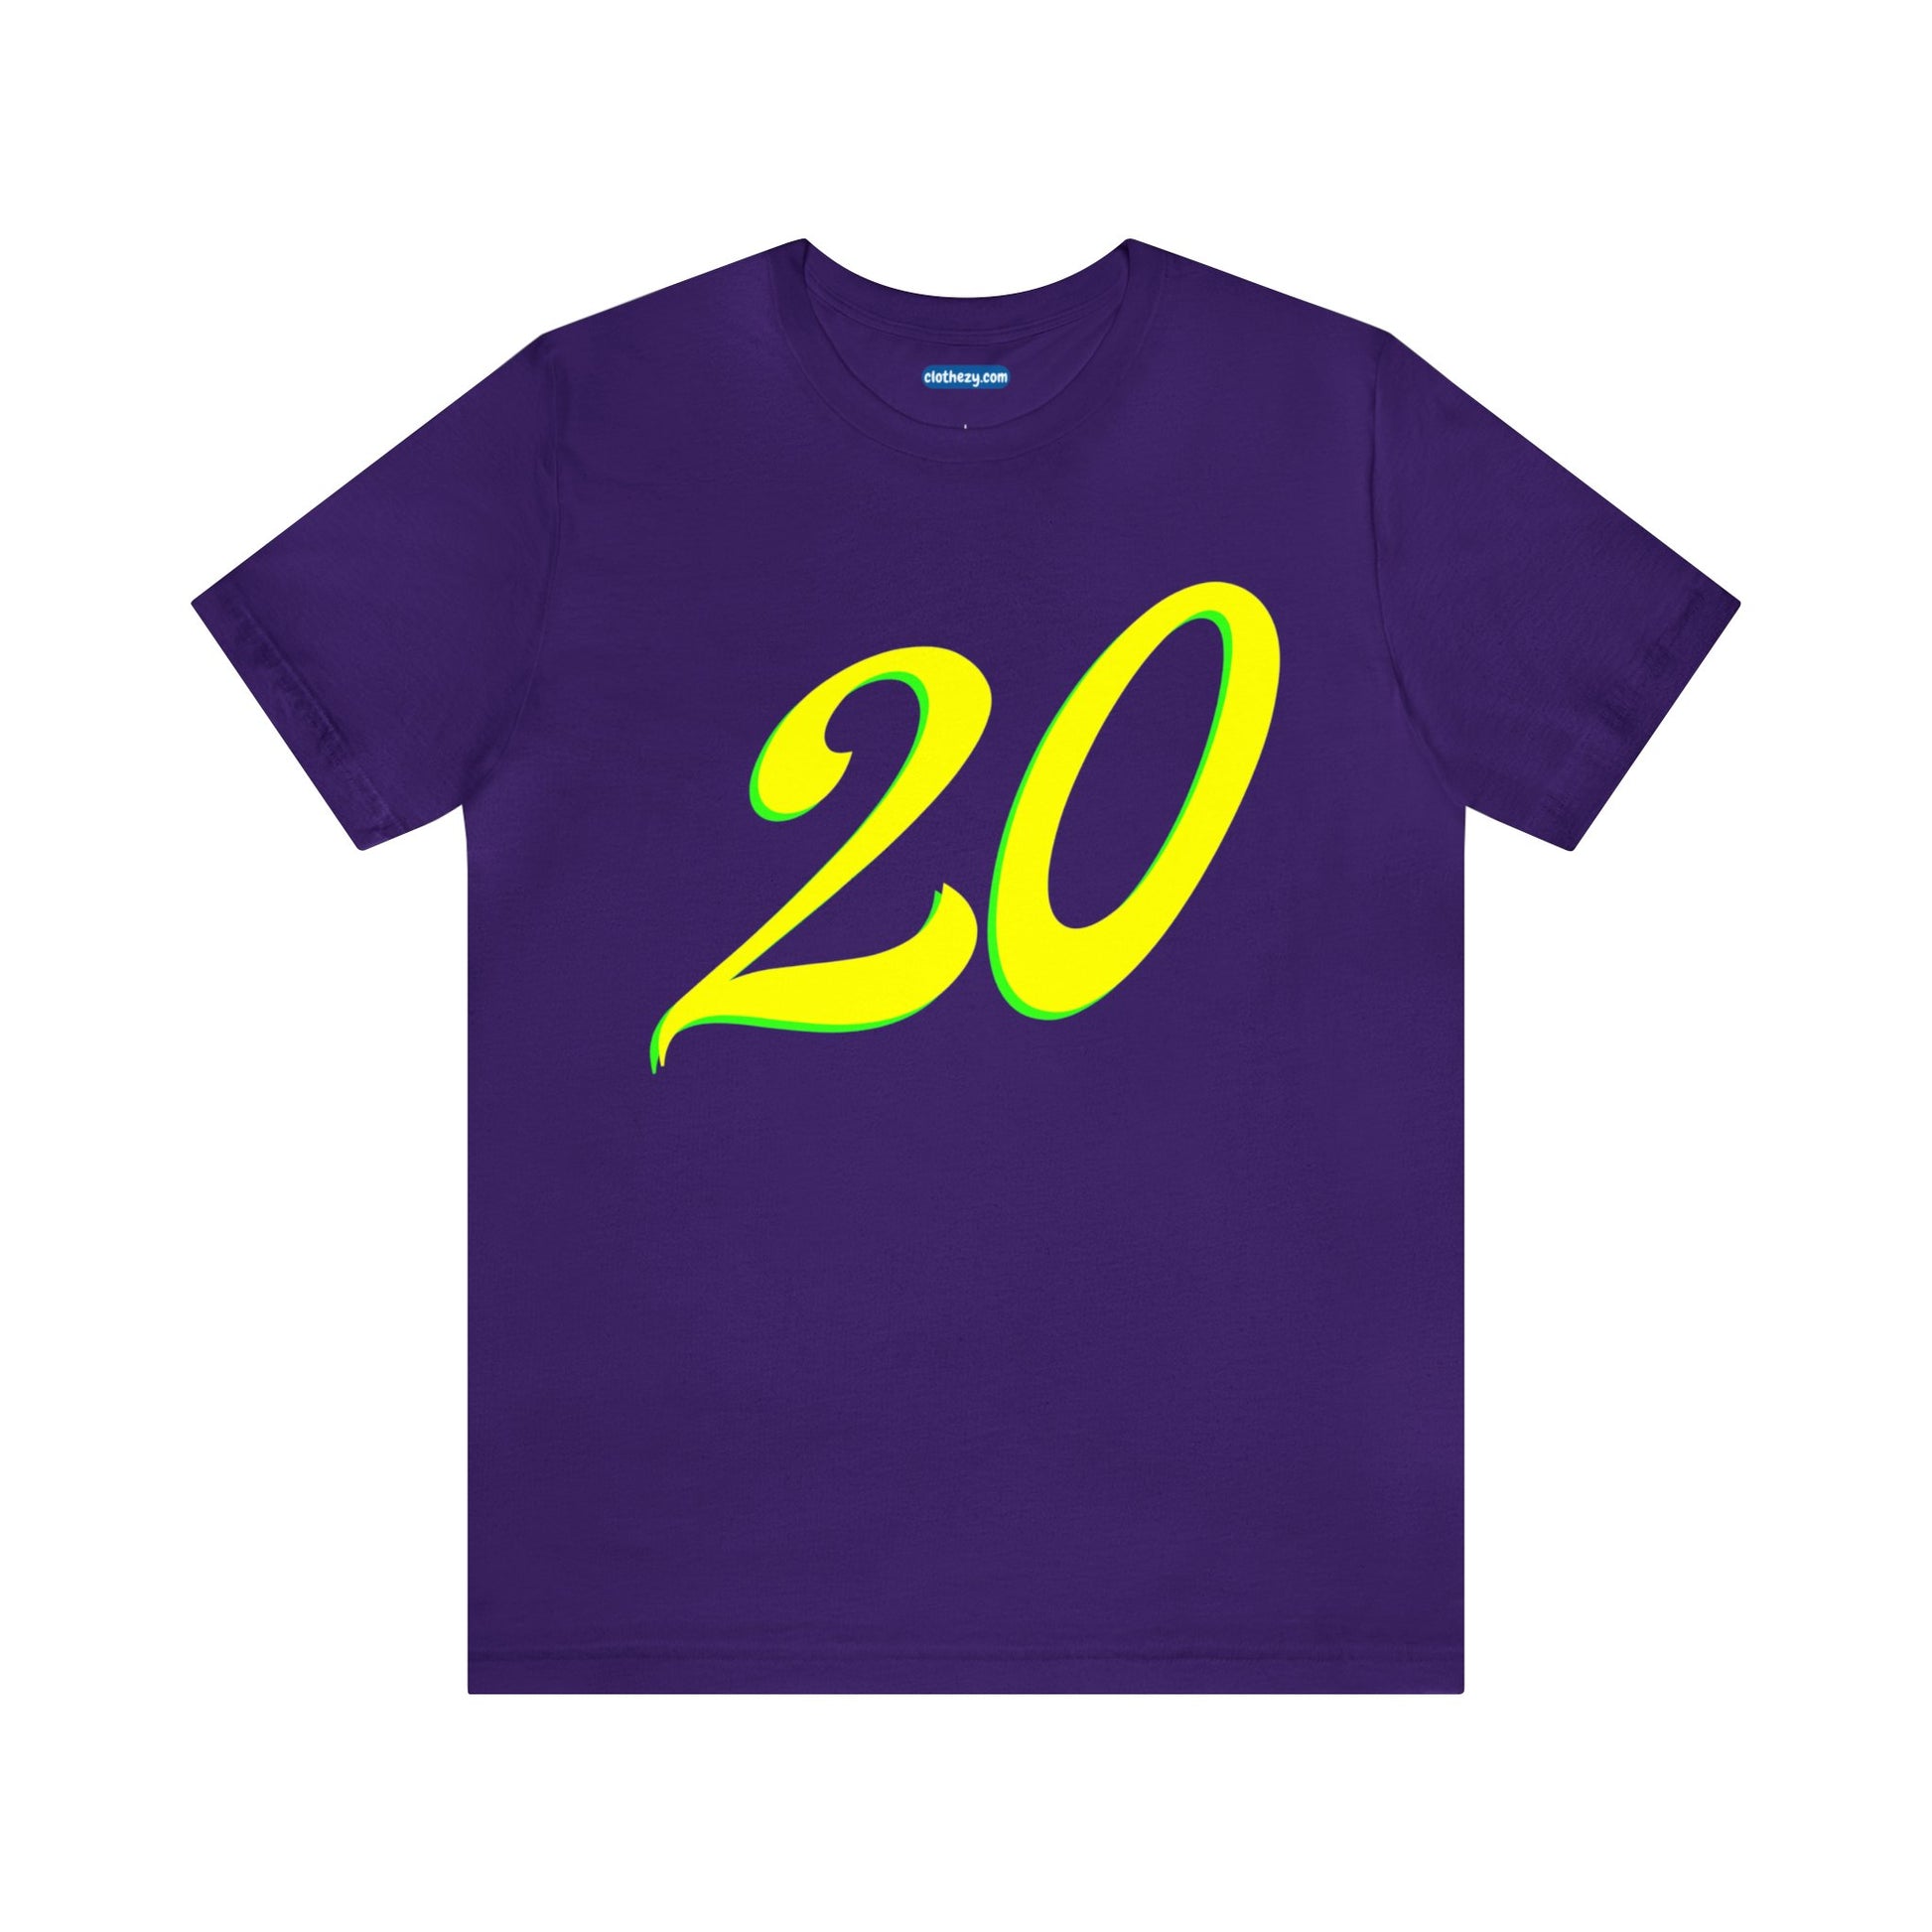 Number 20 Design - Soft Cotton Tee for birthdays and celebrations, Gift for friends and family, Multiple Options by clothezy.com in Purple Size Small - Buy Now